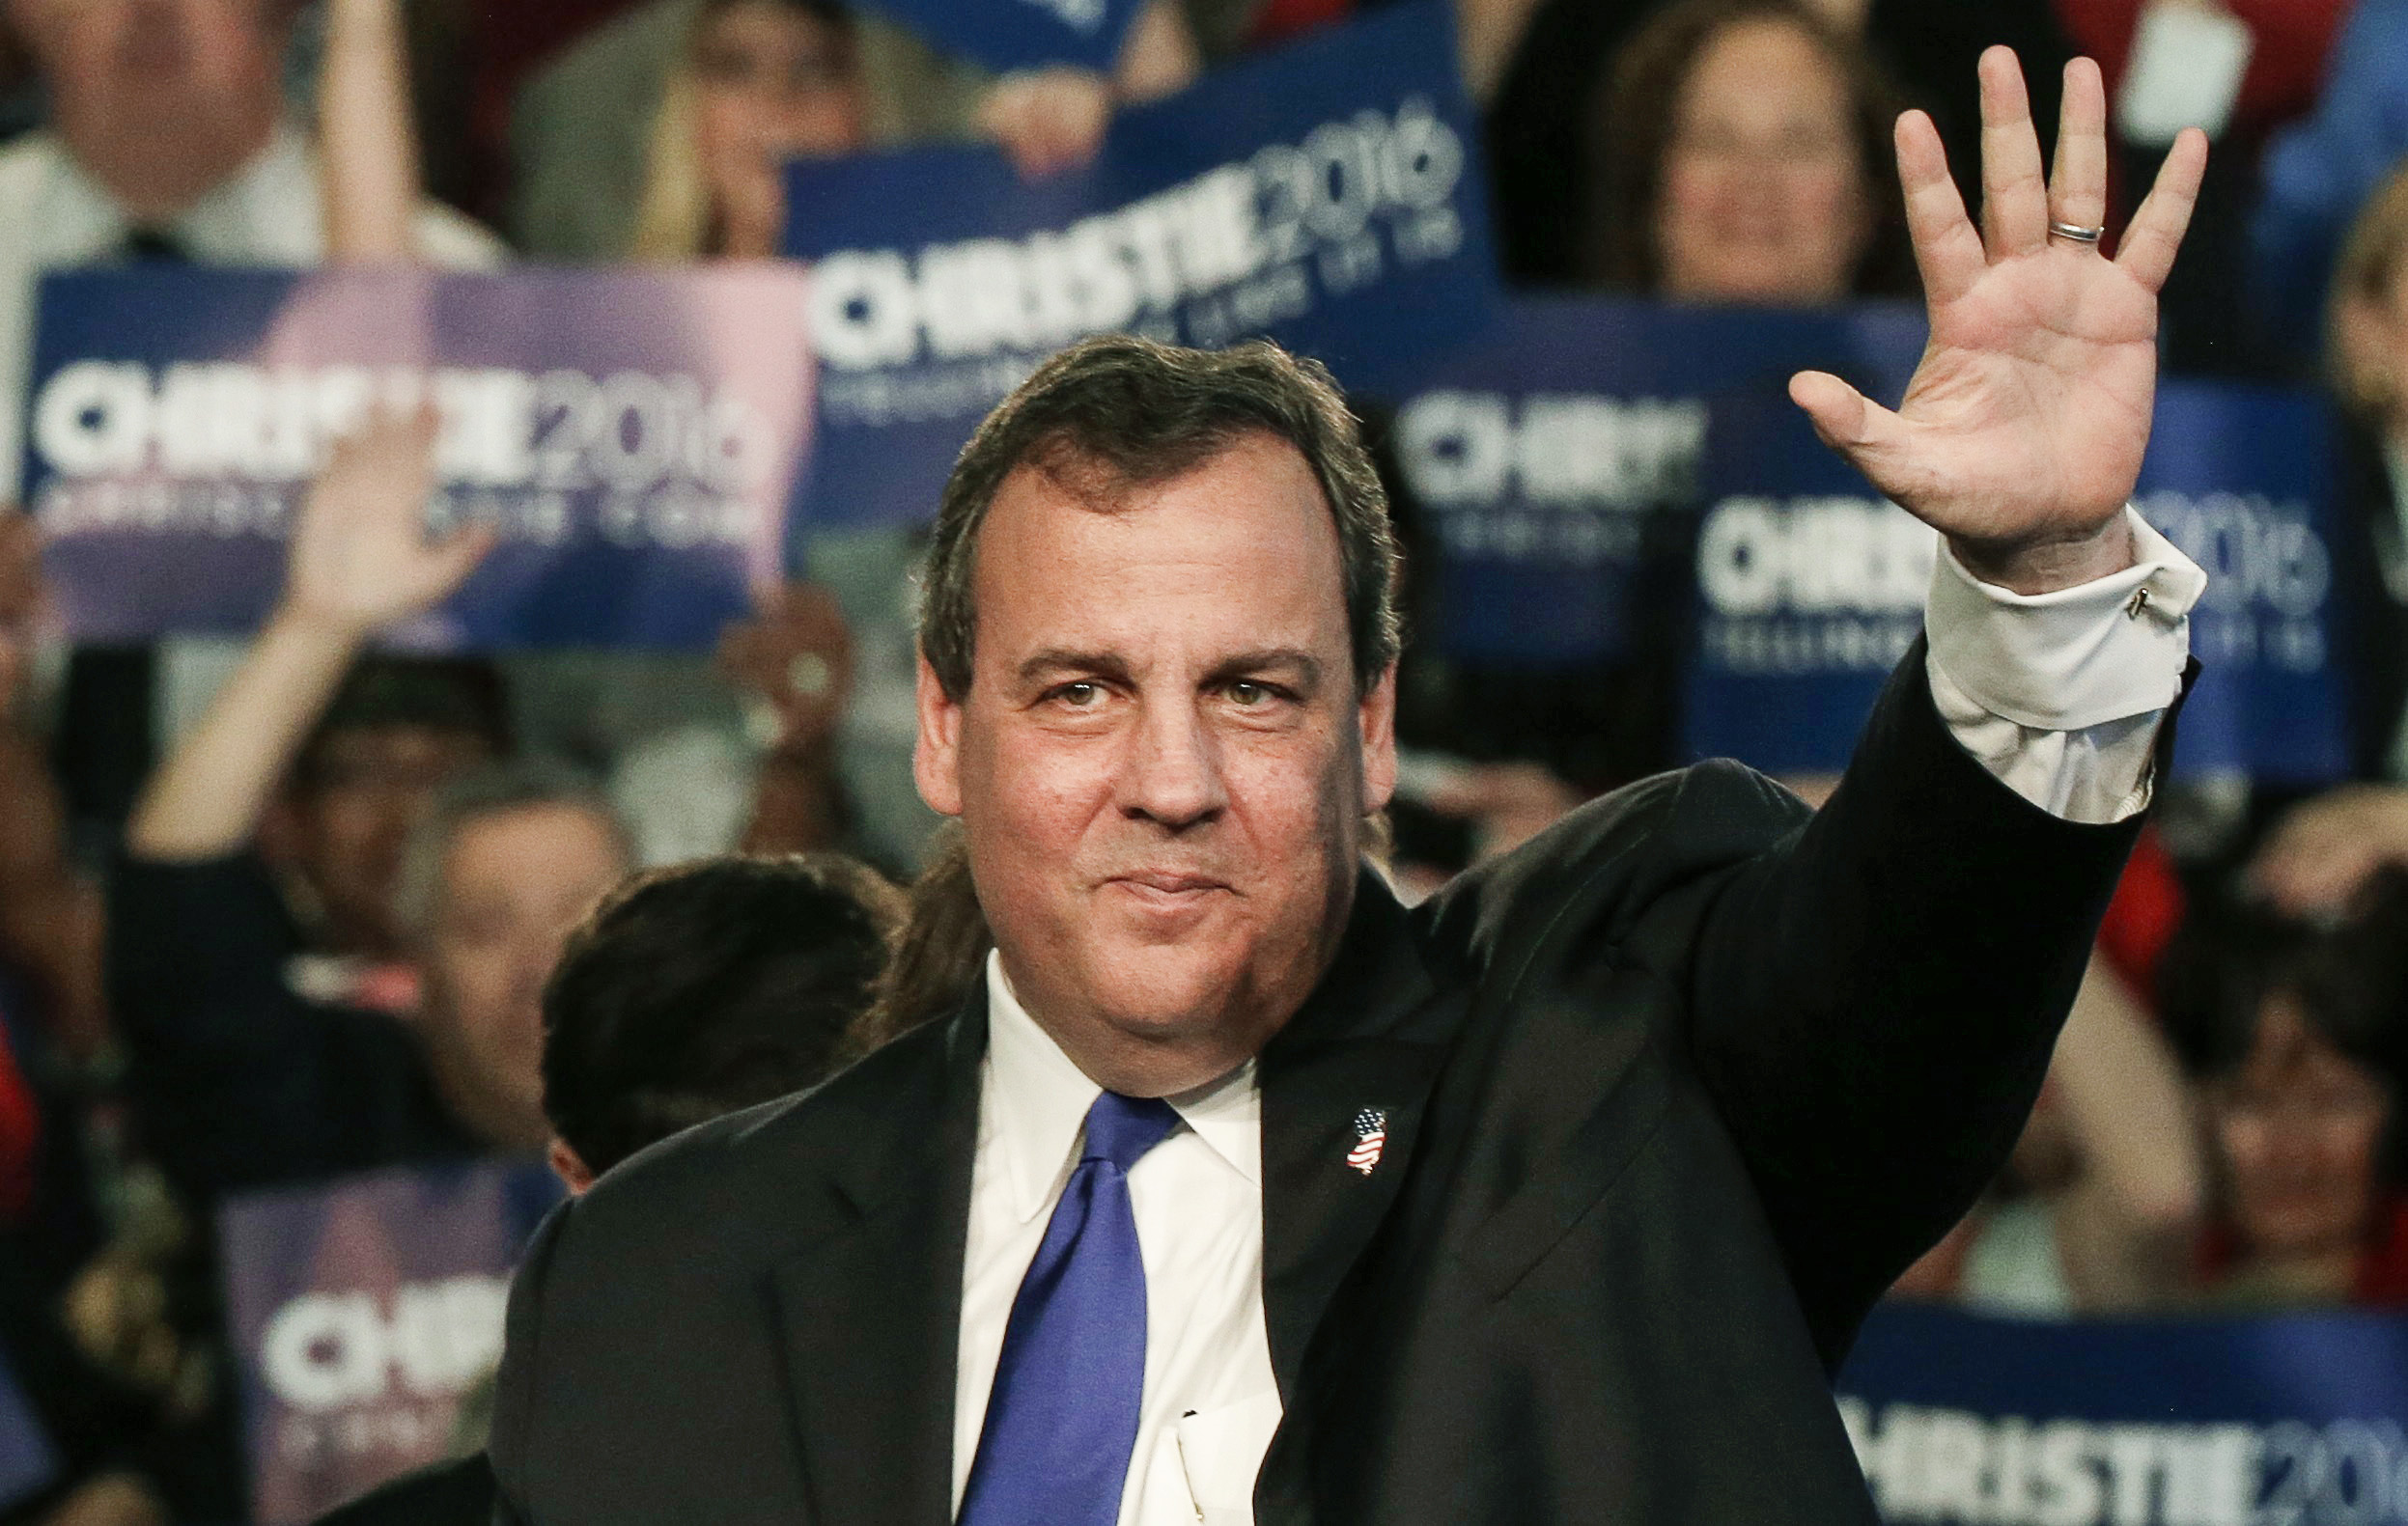 Does New Jersey Gov. Chris Christie have what it takes to win the presidency?